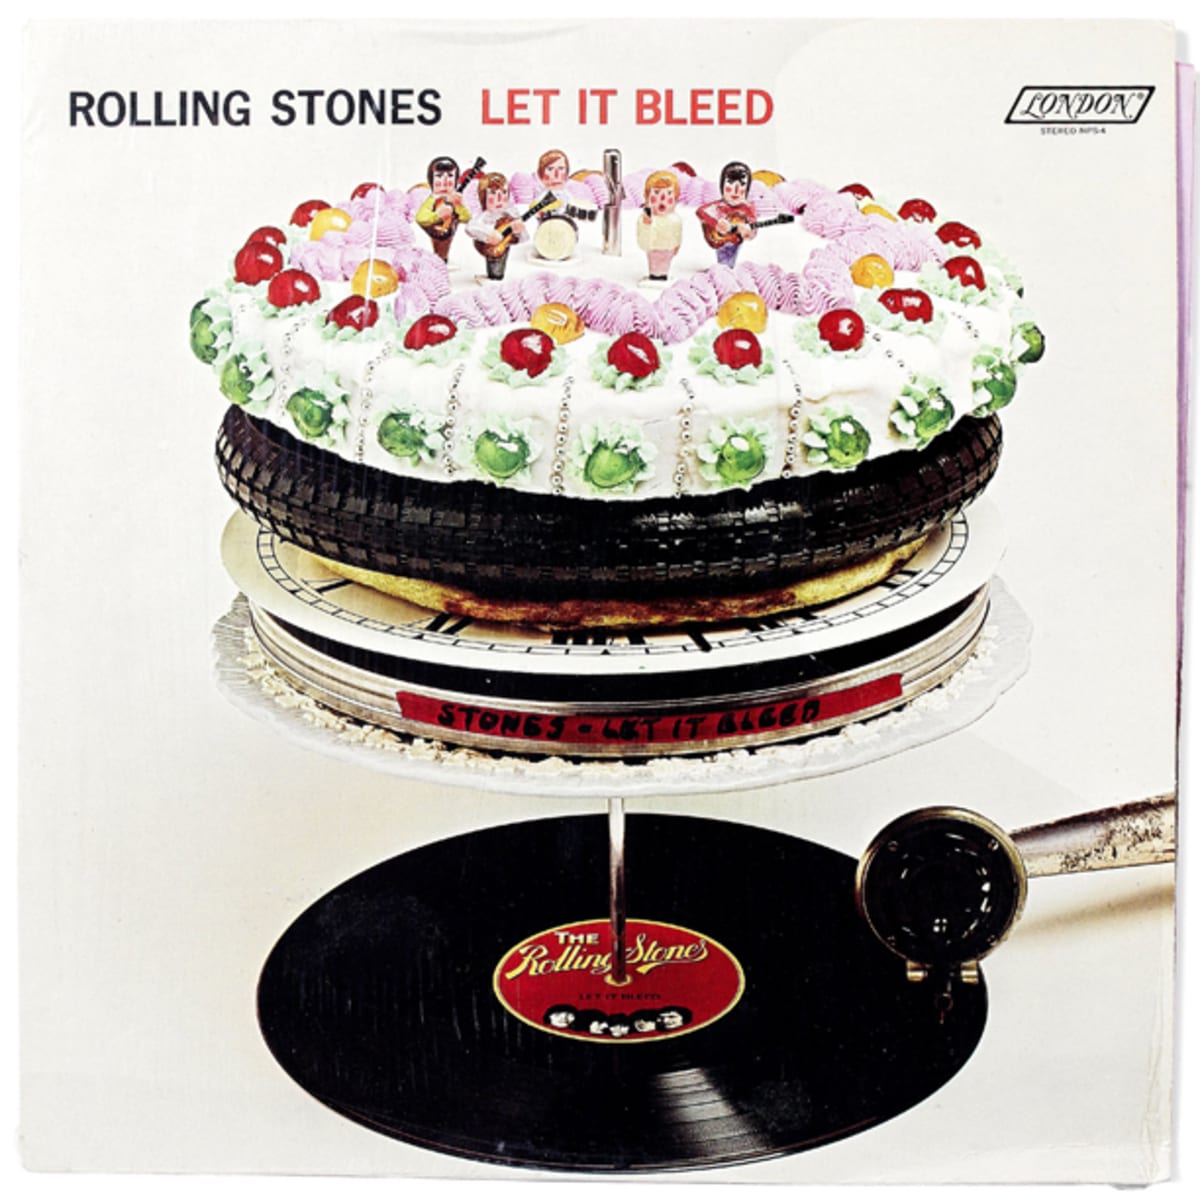 Rolling Stones' 'Let It Bleed' album art heads to auction ...